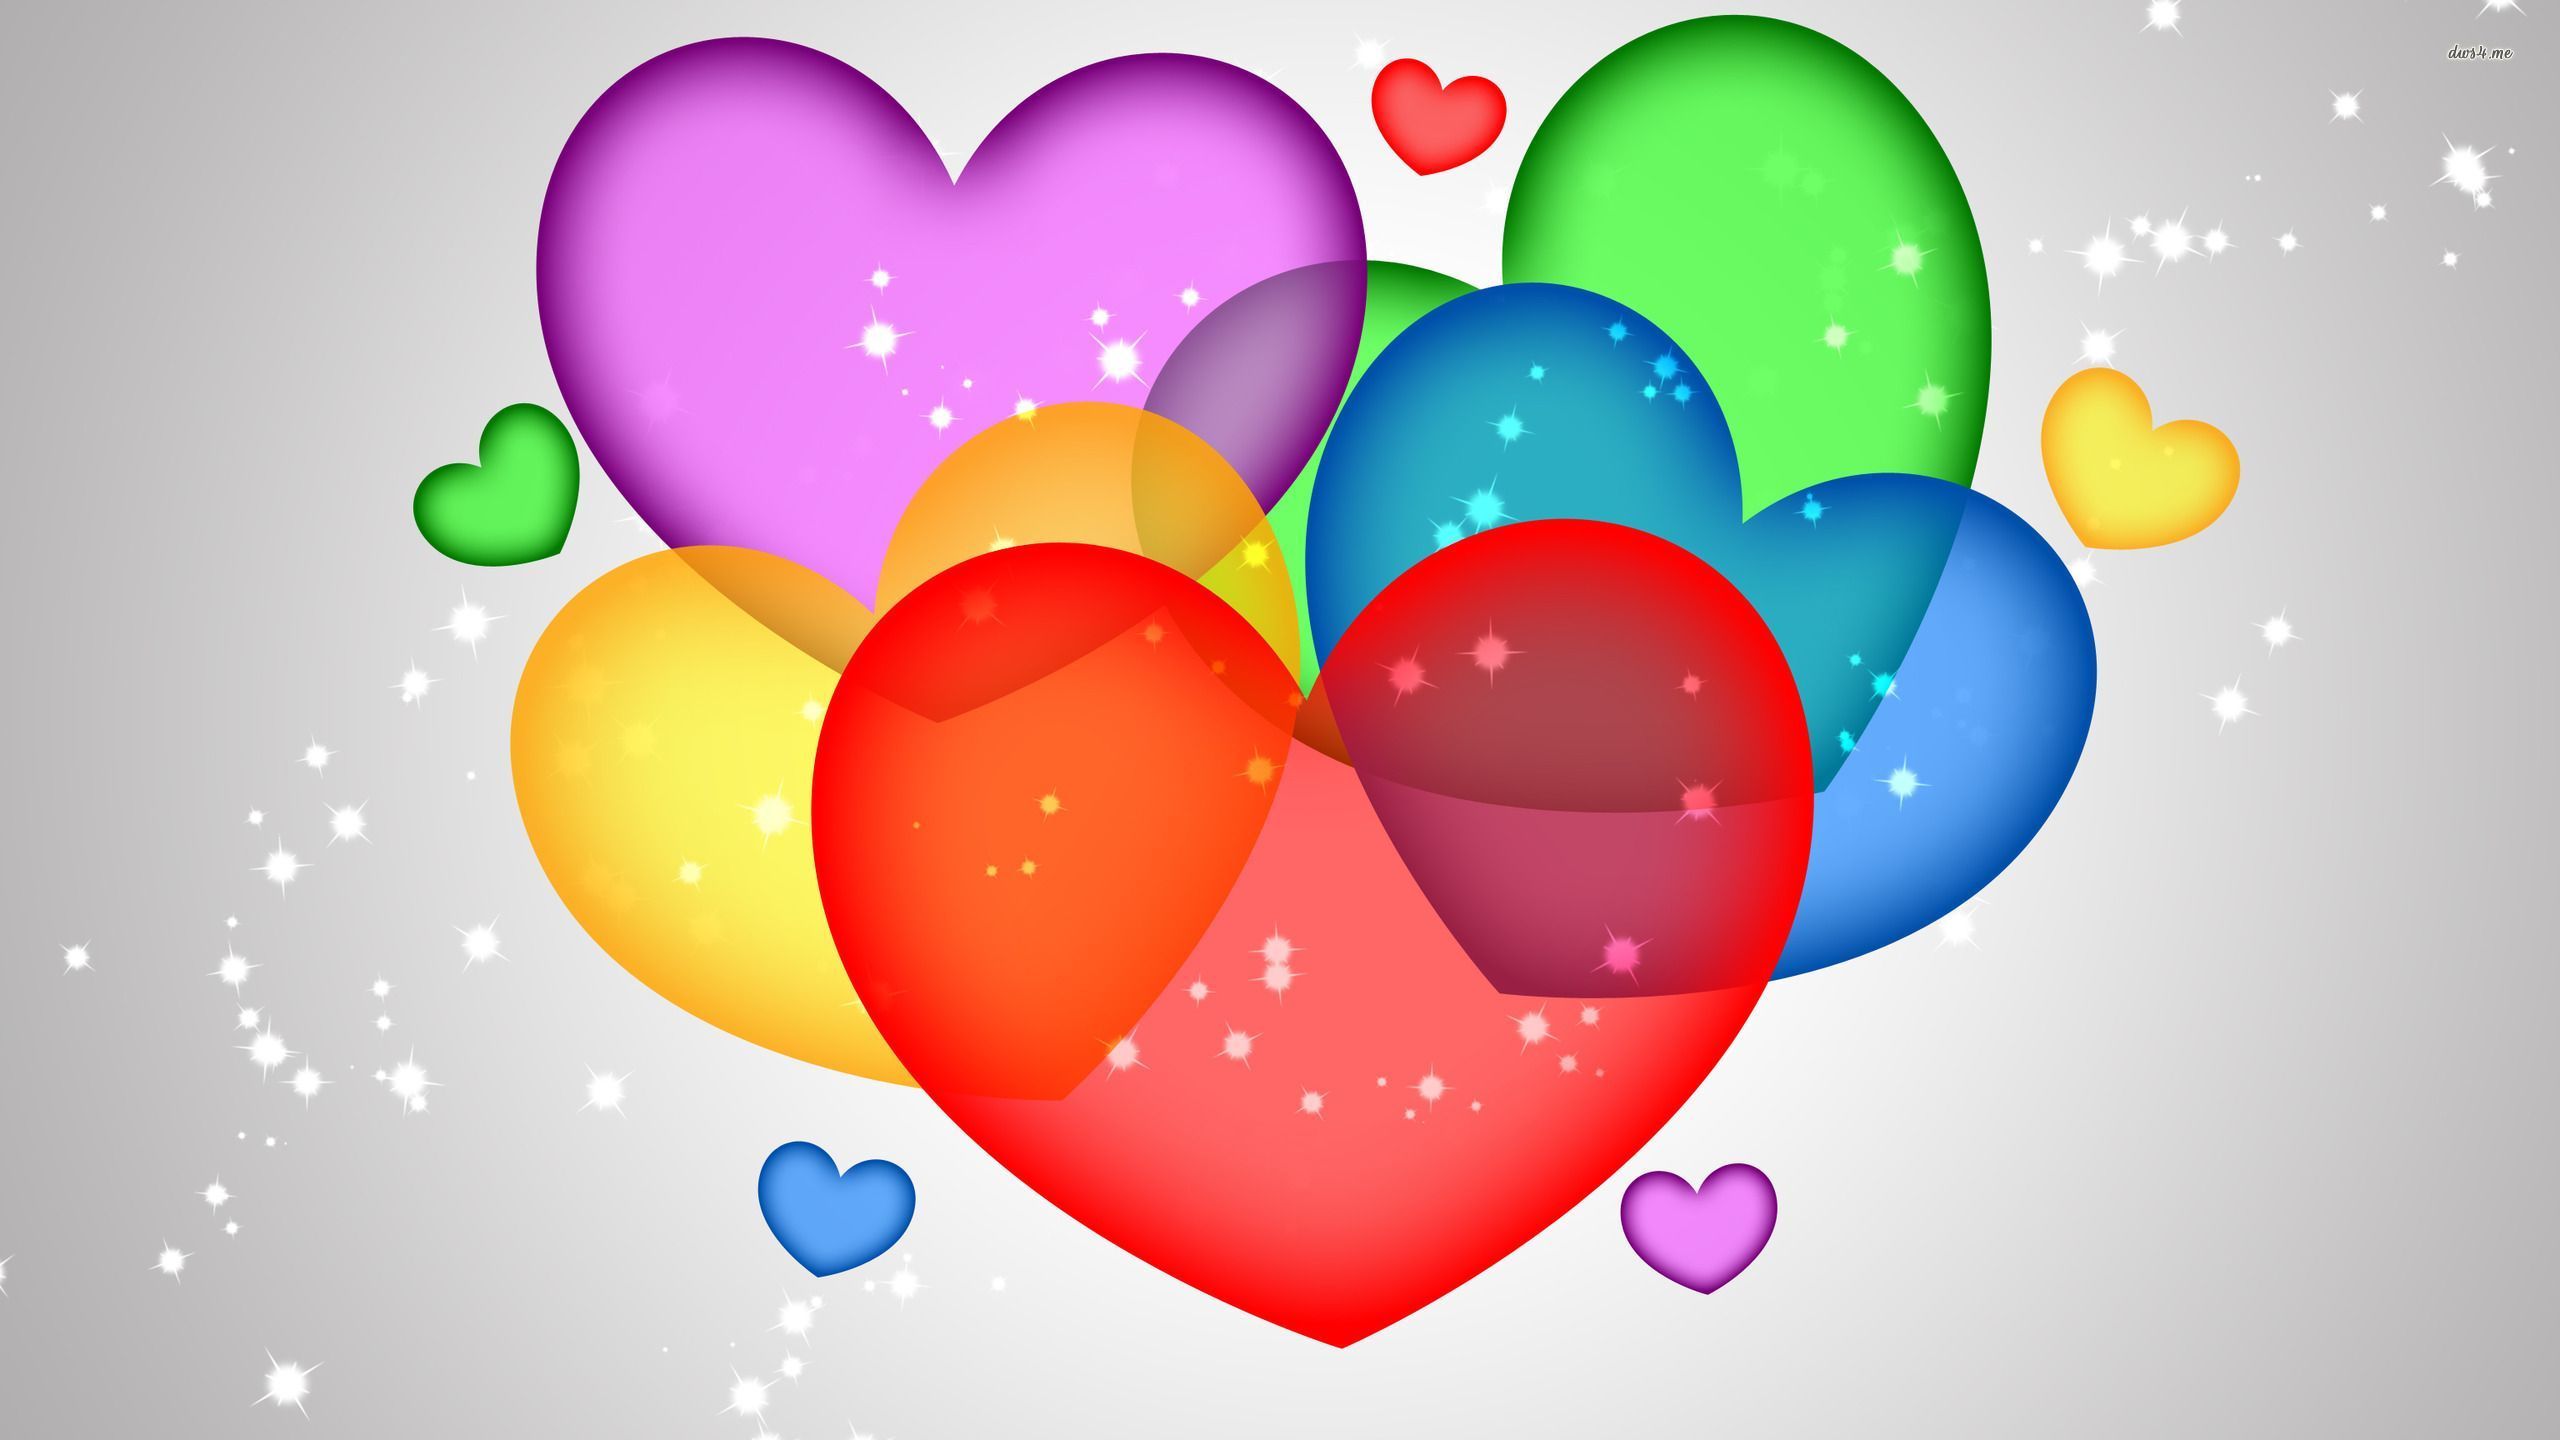 Download wallpapers colorful heart 4k minimalism black backgrounds  abstract hearts background with heart love concepts for desktop free  Pictures for desktop free